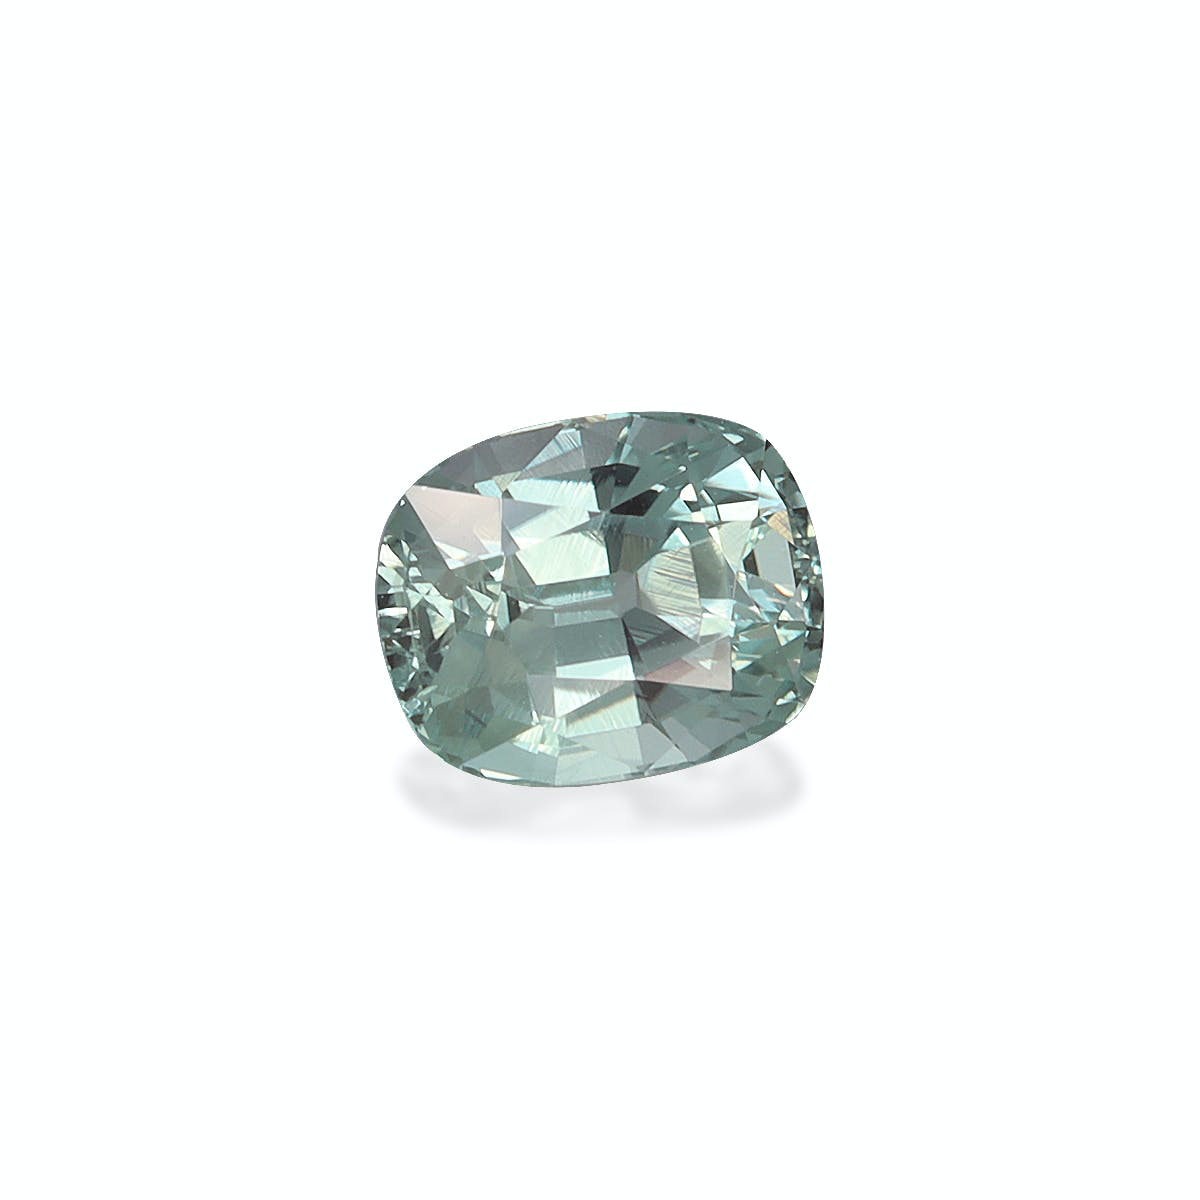 Picture of Color Change Green Alexandrite 0.98ct - 6x4mm (AL0089)